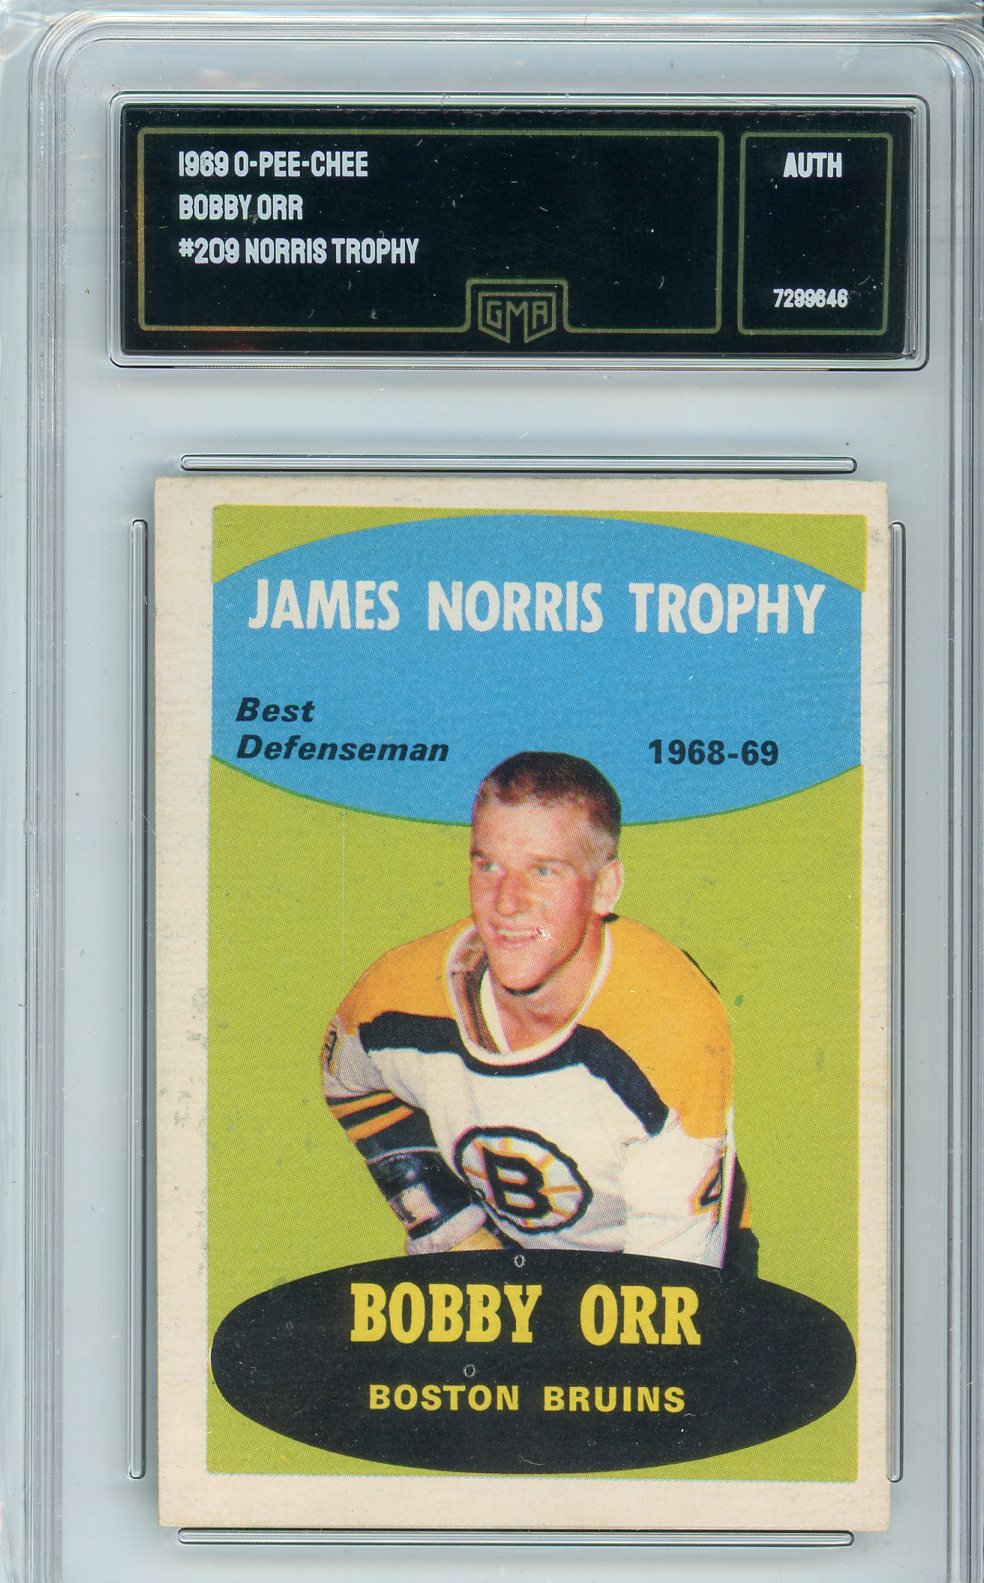 1969 O-Pee-Chee Bobby Orr #209 Norris Trophy Auth